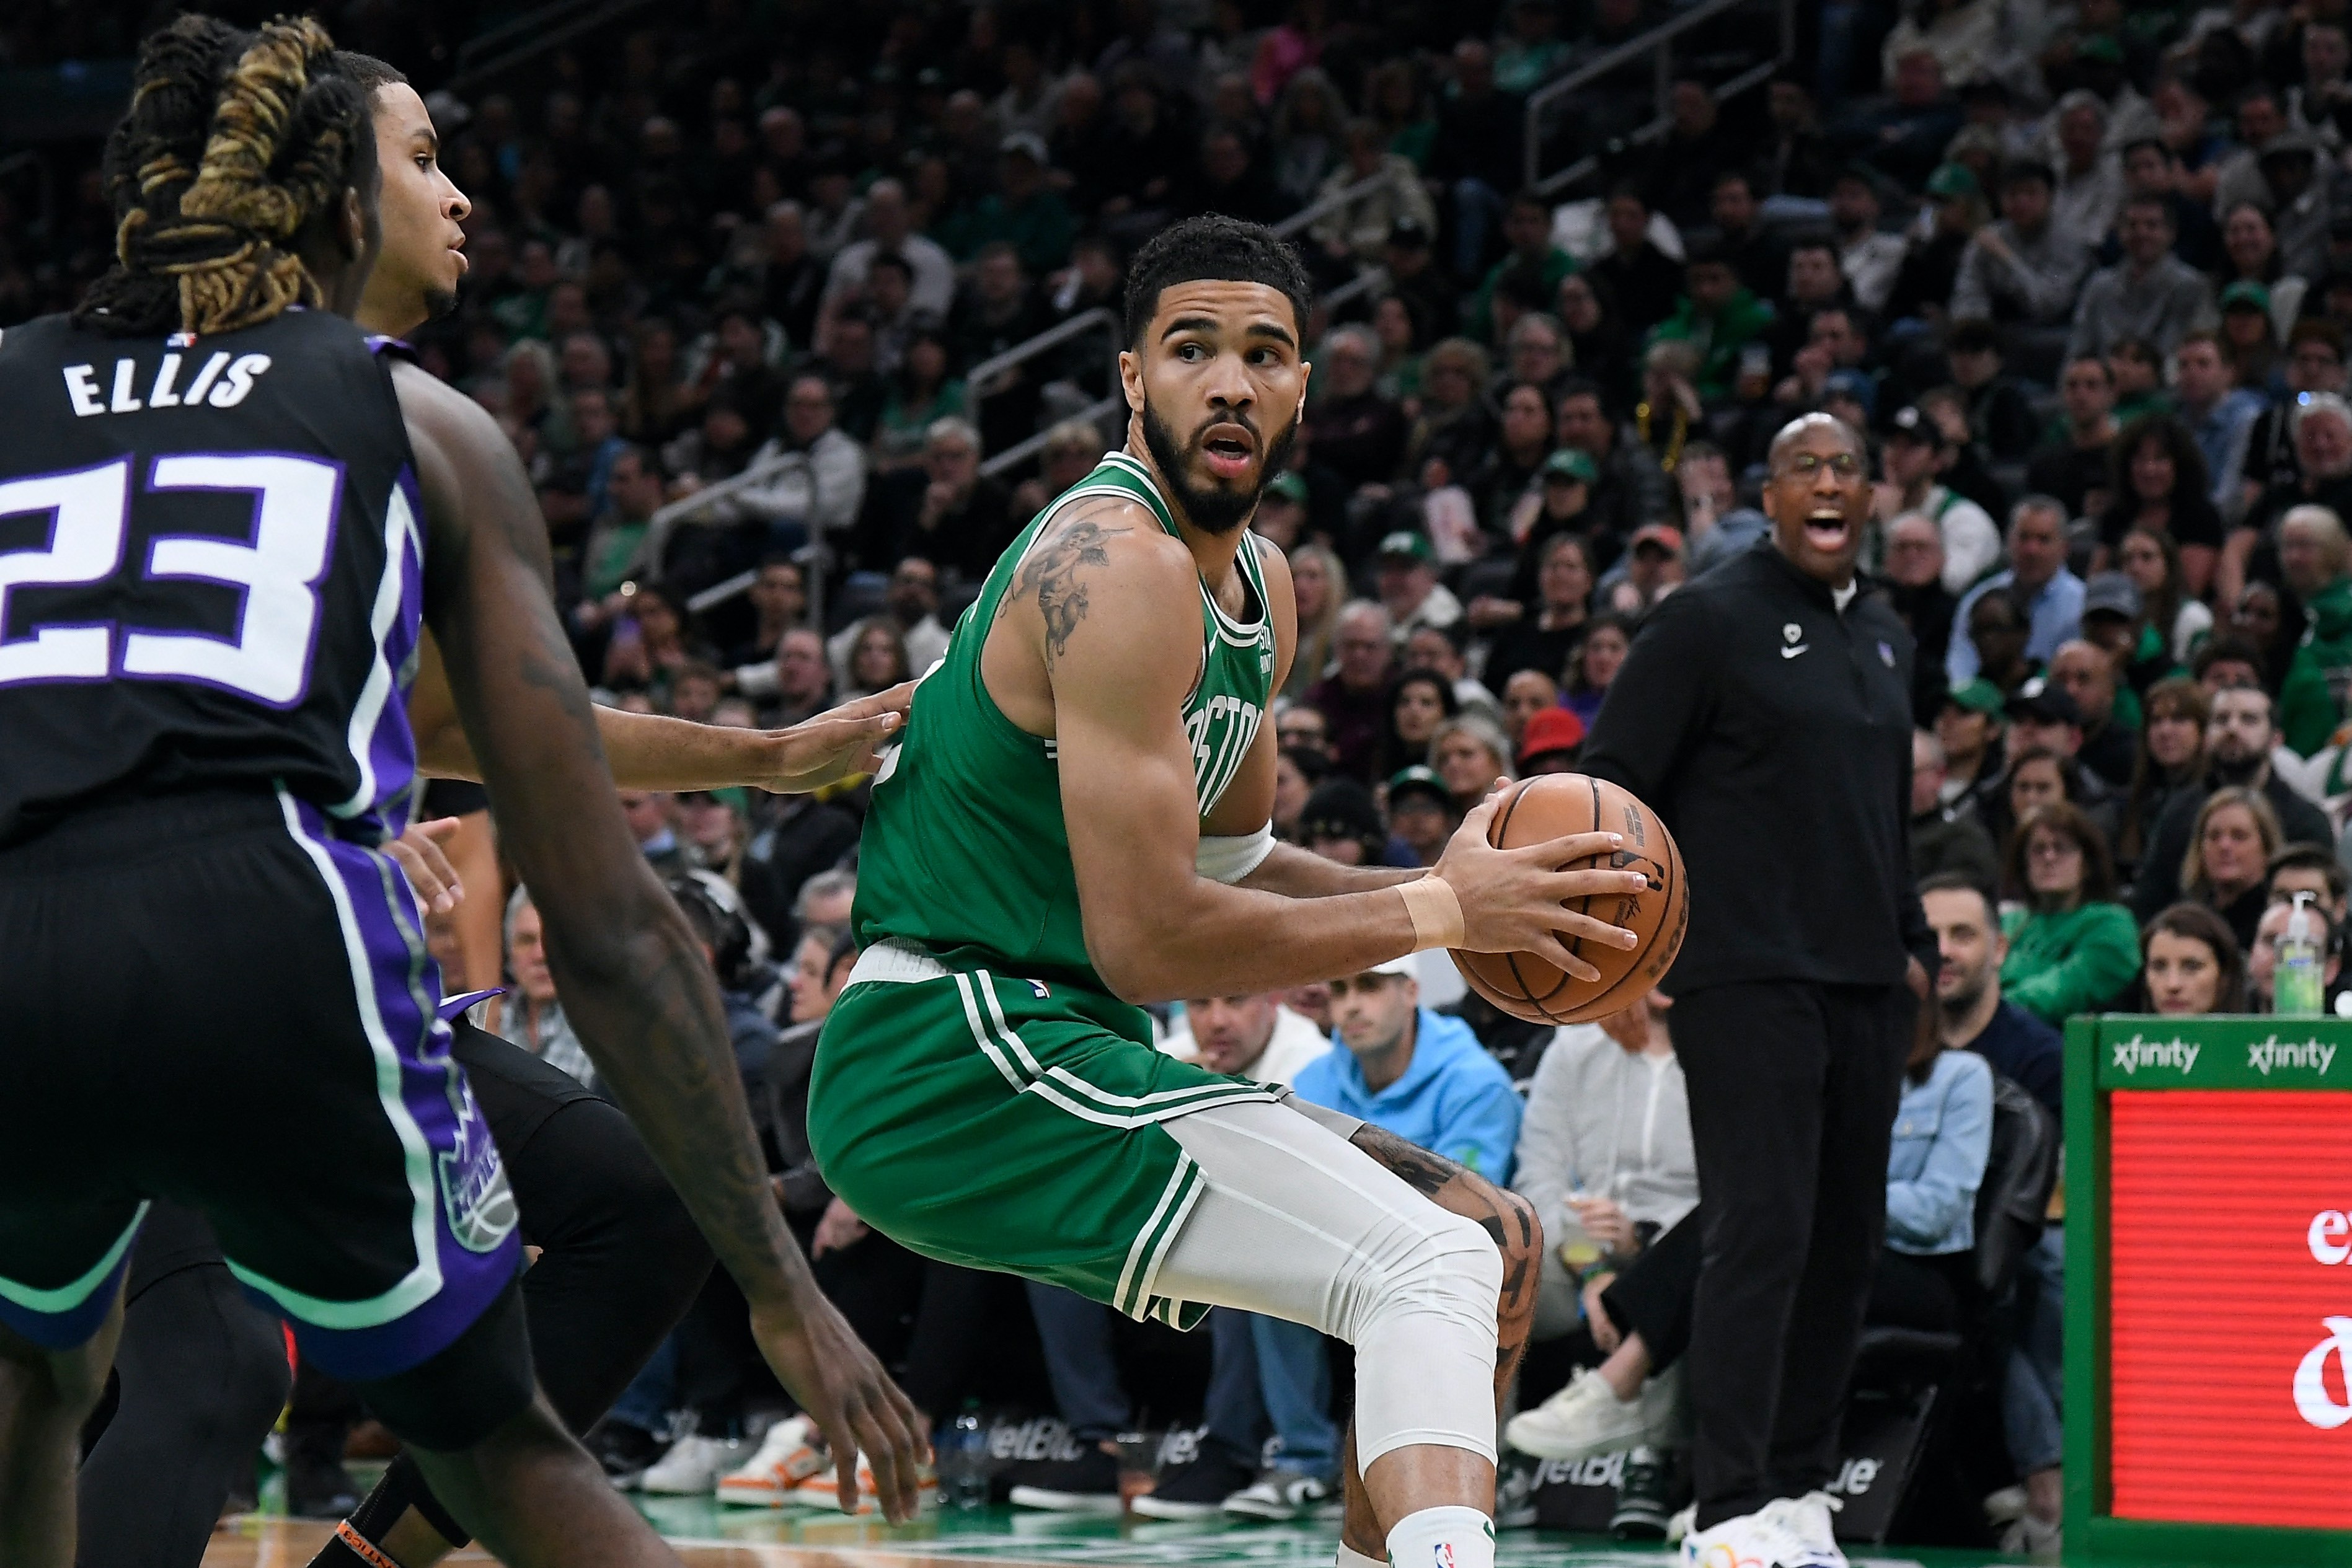 NBA: Kings rally from 19 down, but Celtics win on late shot